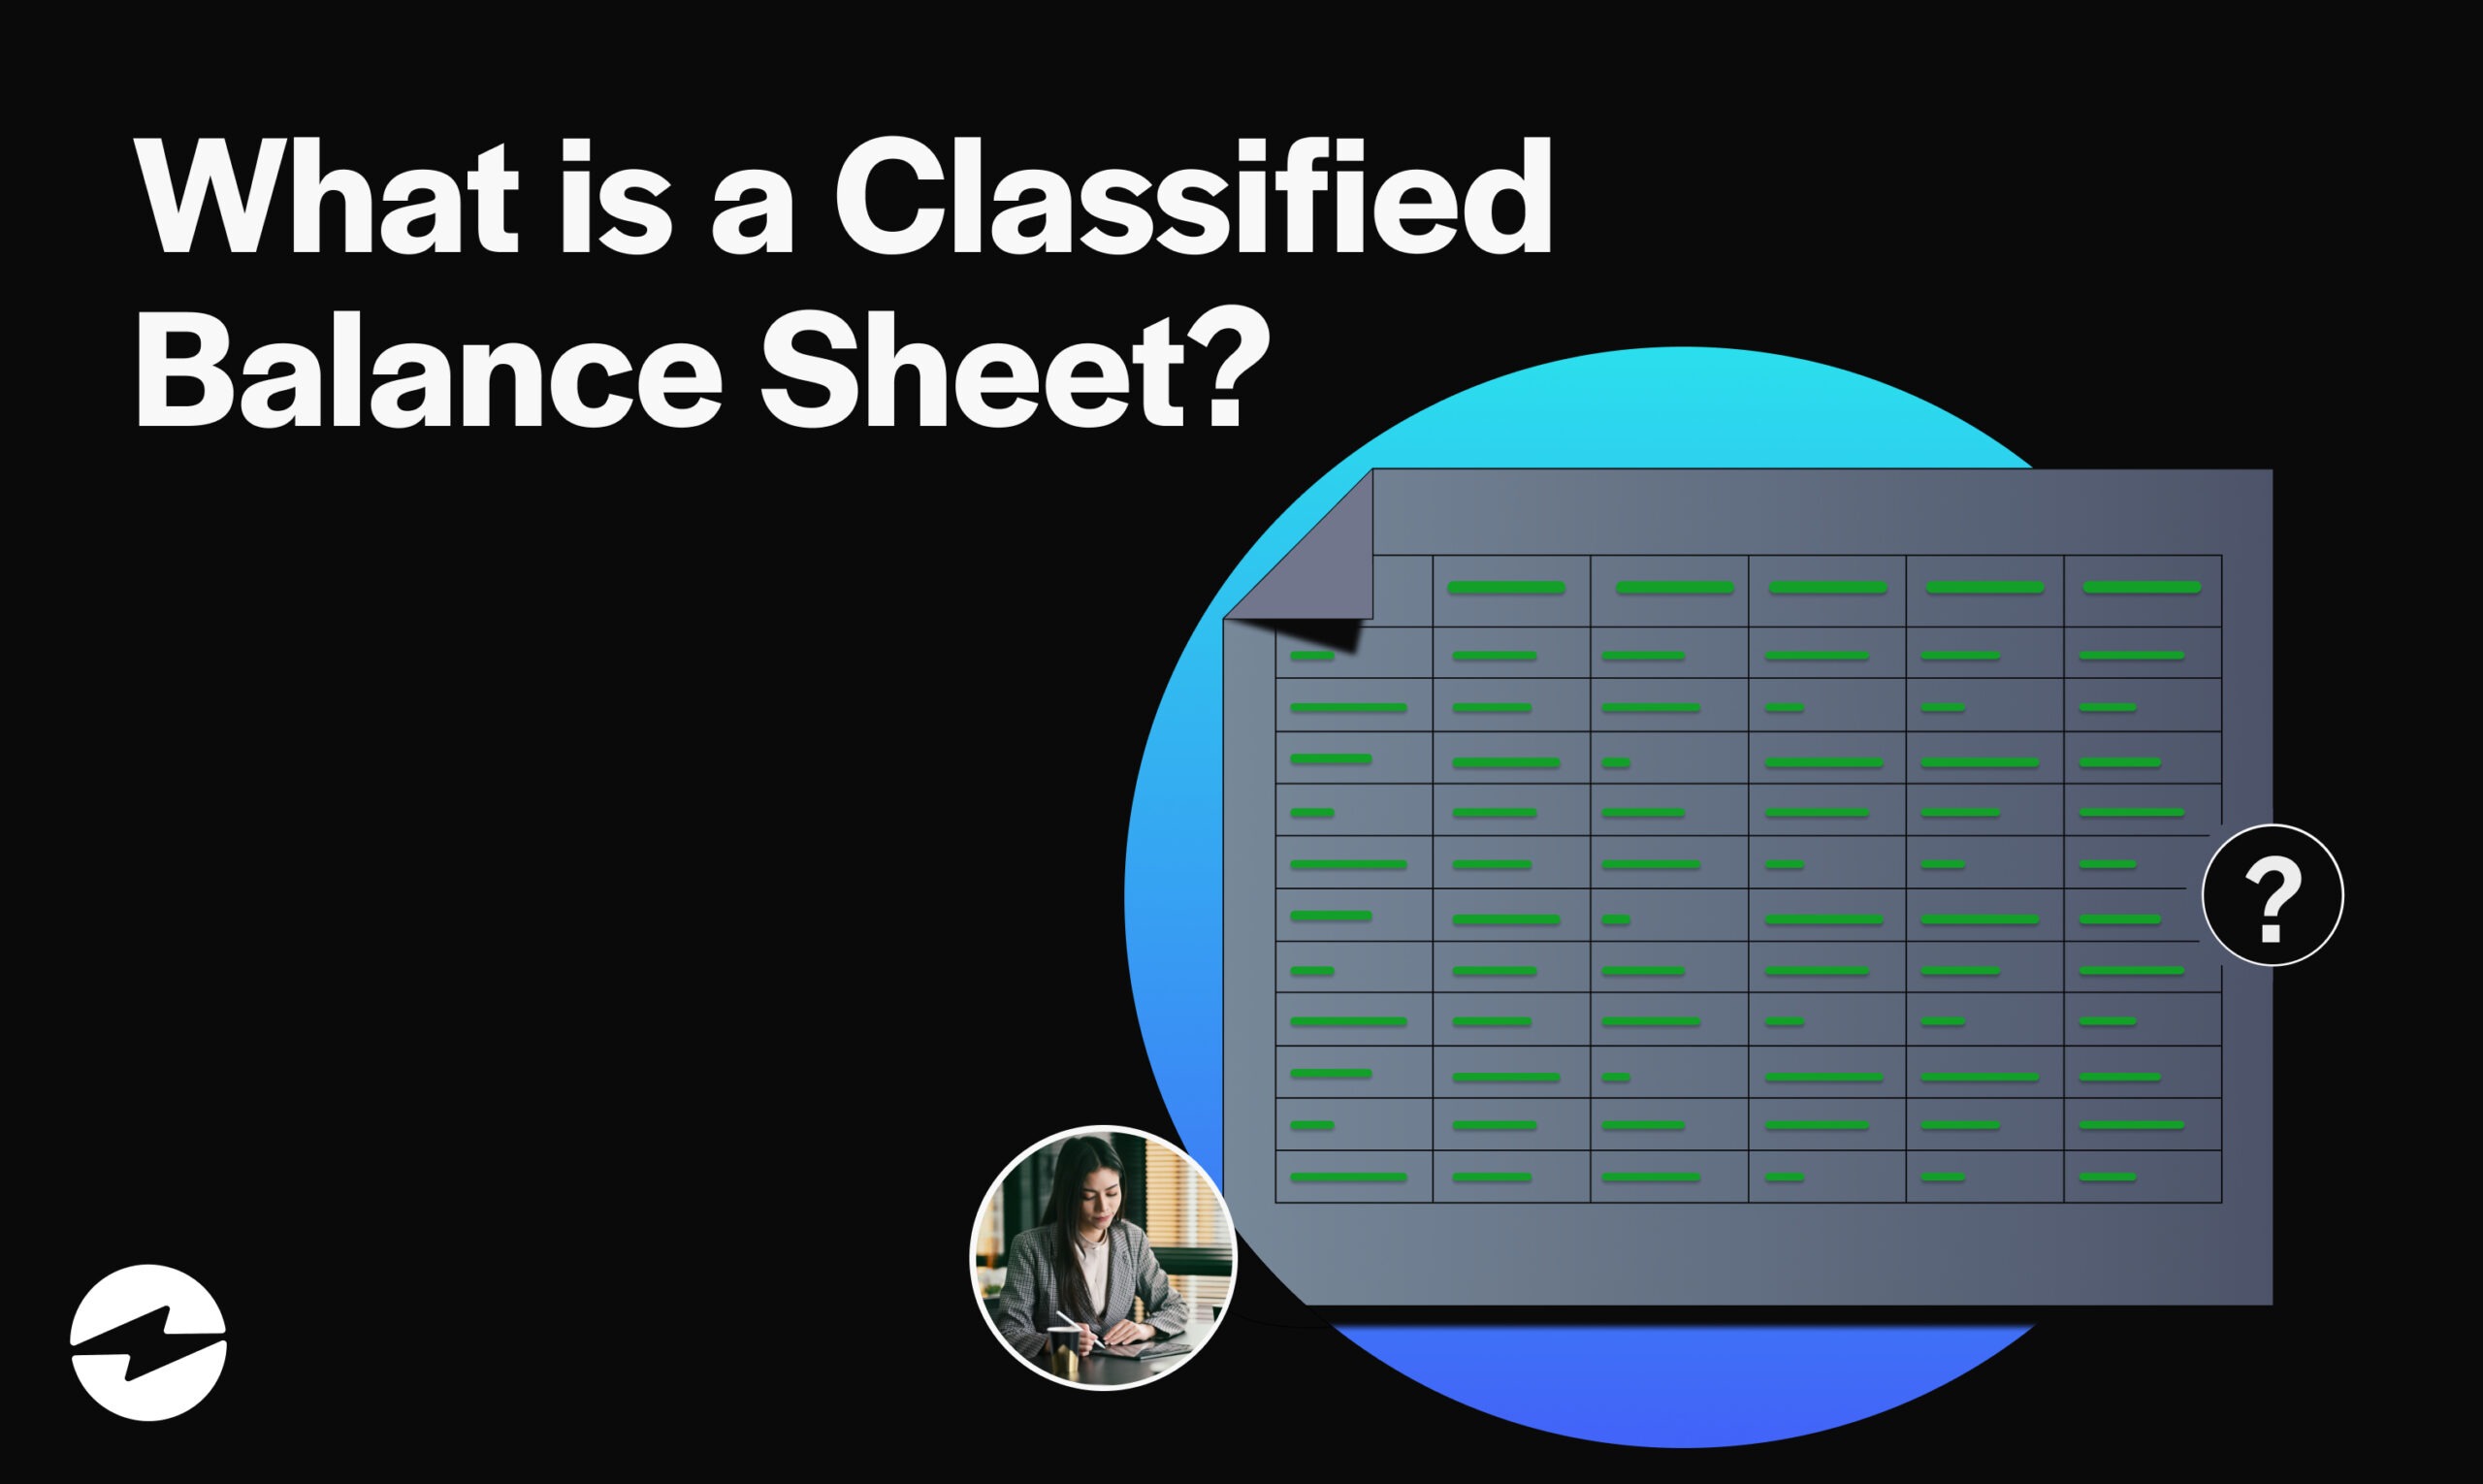 What is a Classified Balance Sheet